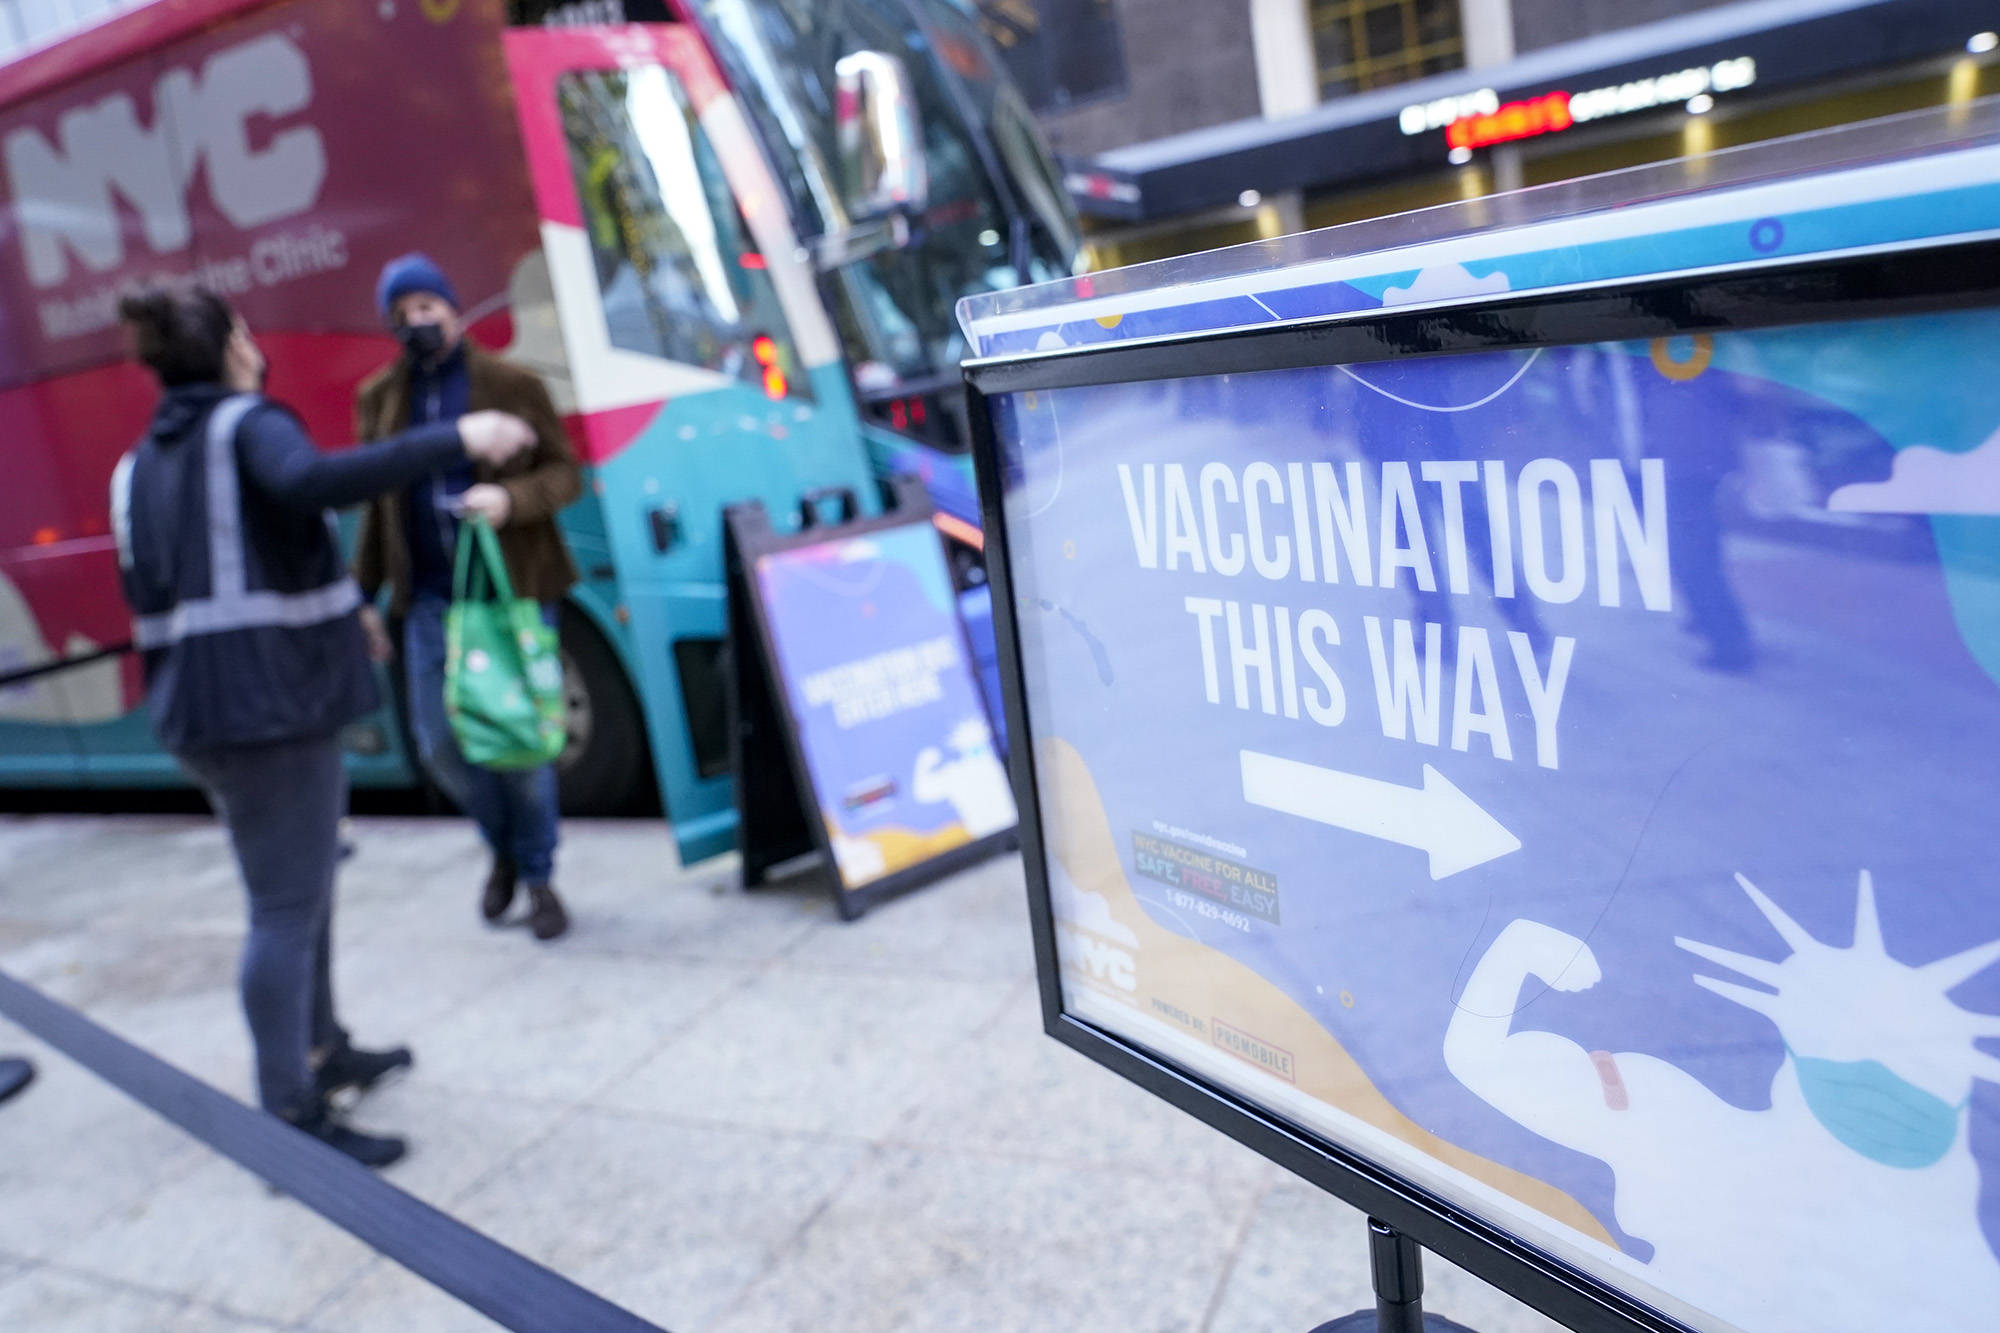  health care worker, right, directs a man who was just vaccinated to an observation area at NYC mobile vaccine clinic in Midtown Manhattan, Monday, Dec. 6, 2021